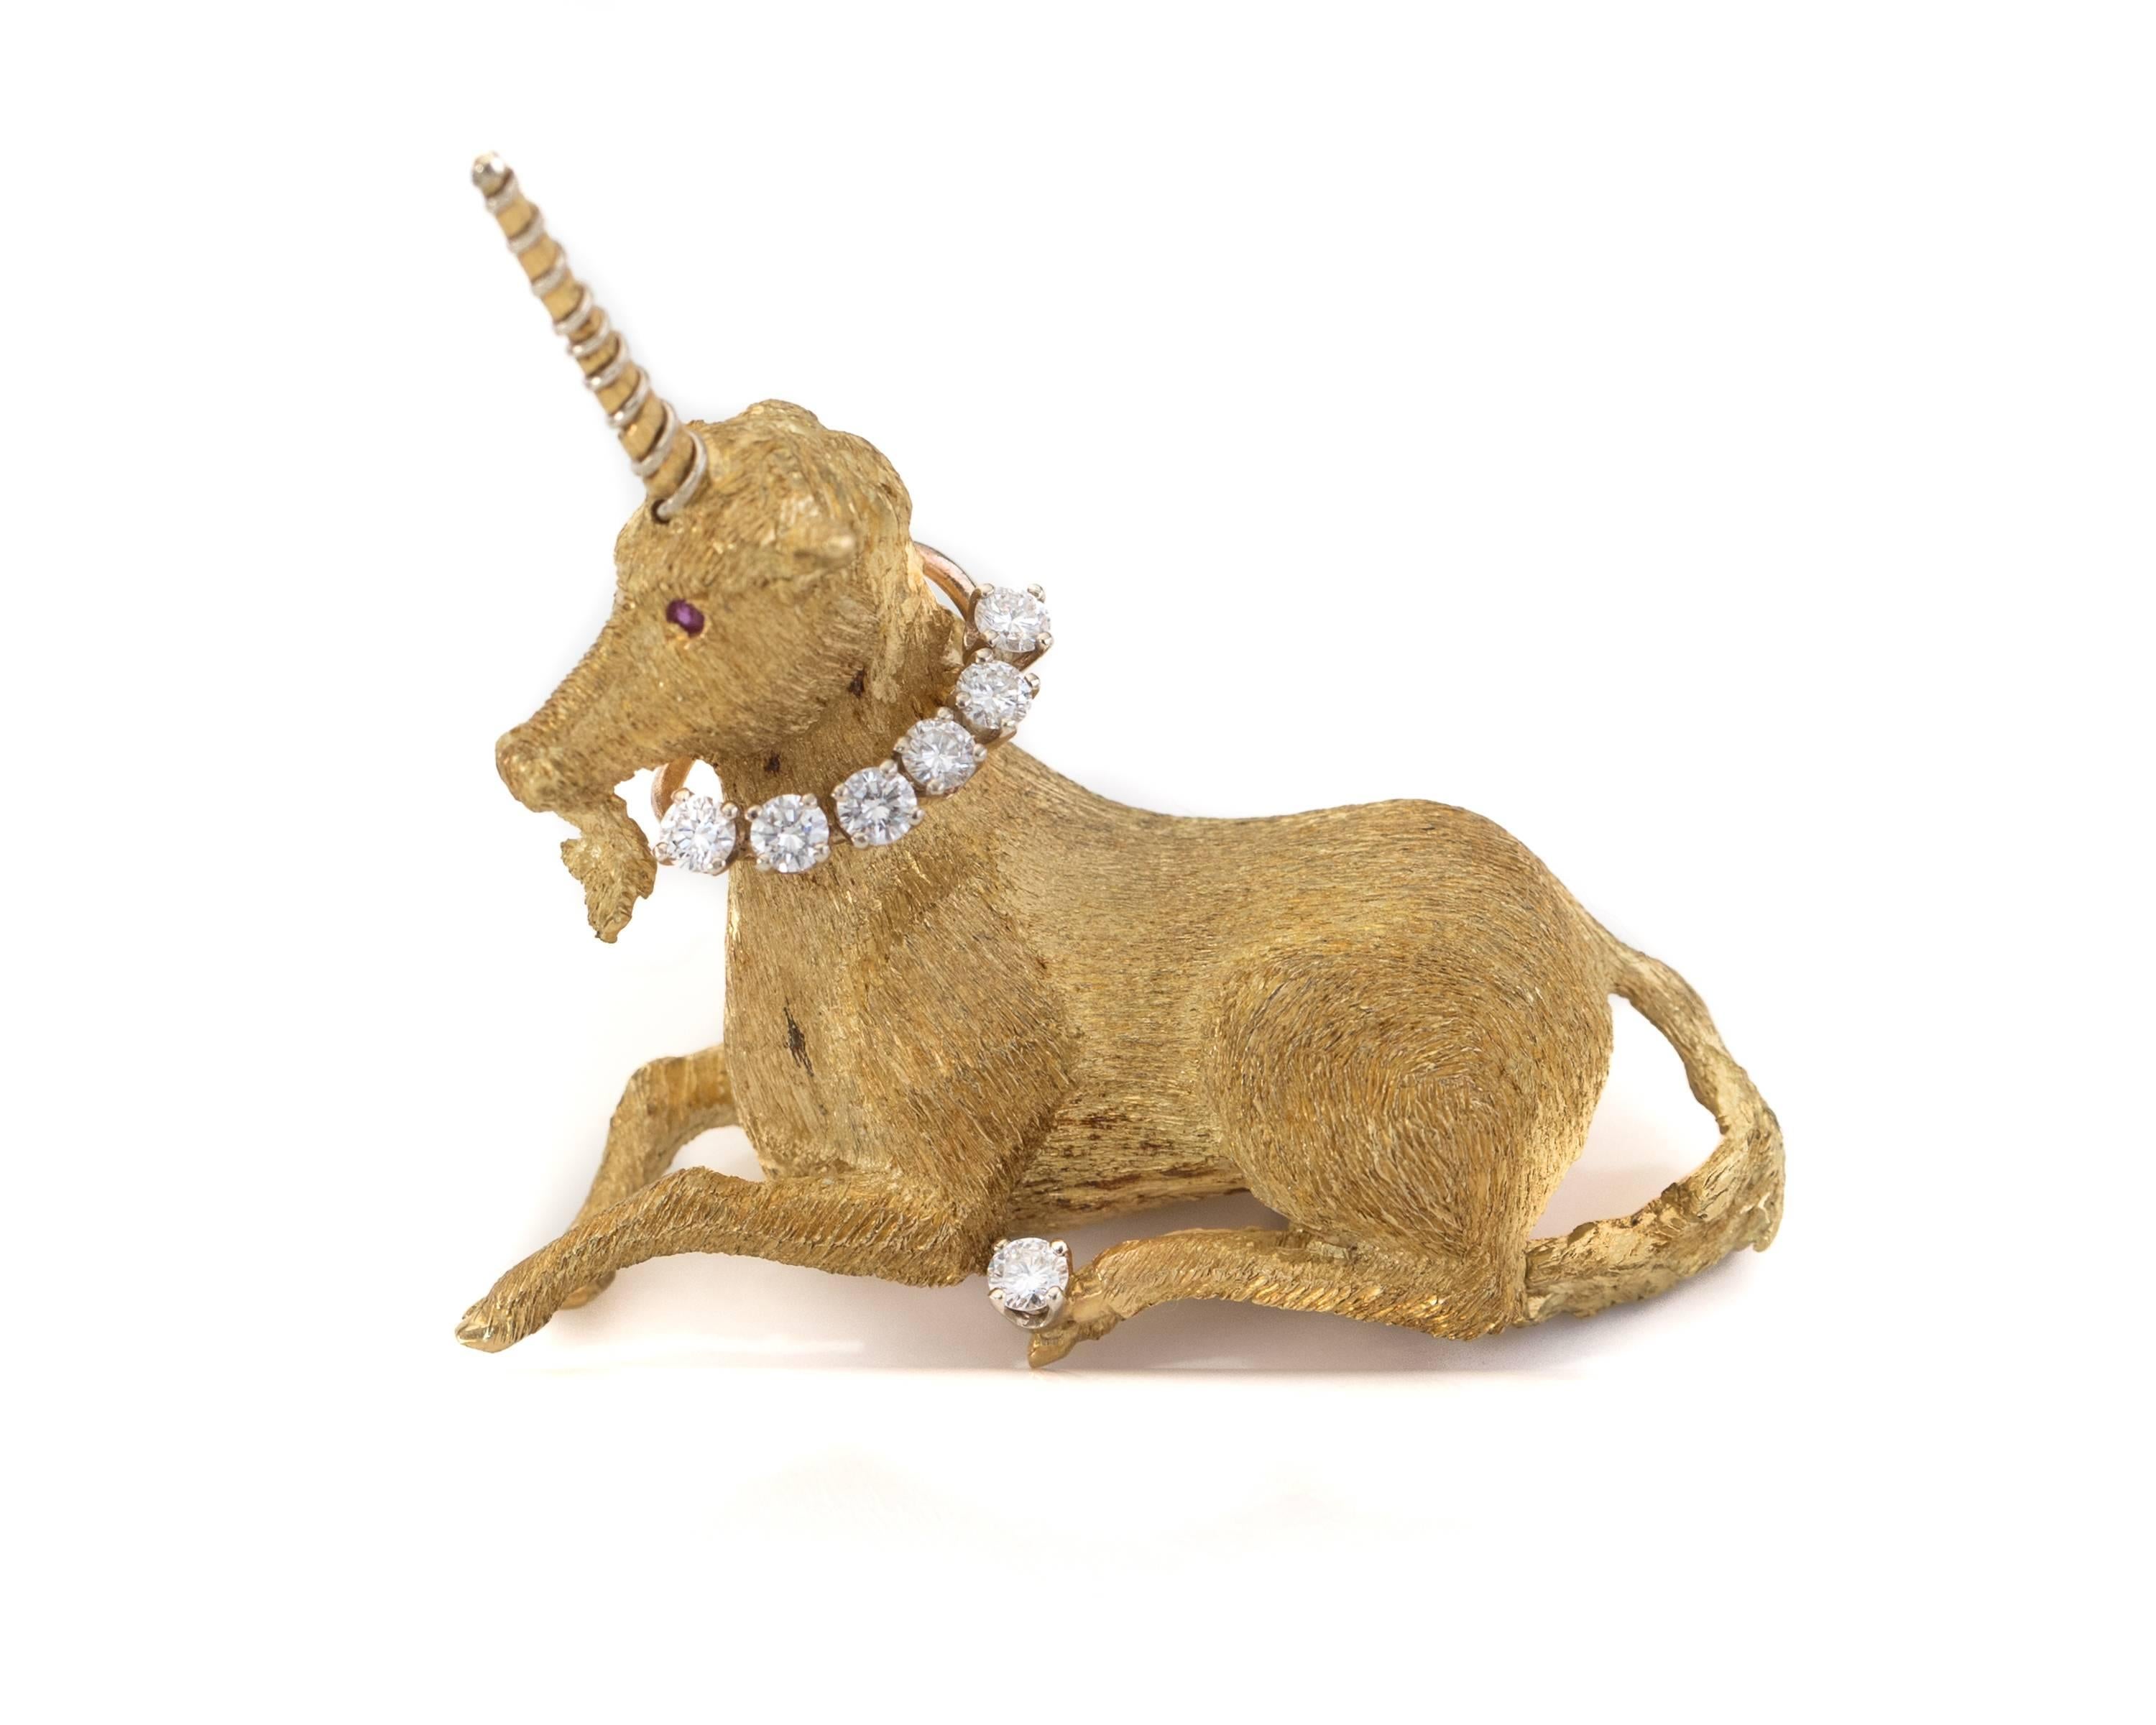 1970s Vintage Tiffany and Co. 18K Gold, Diamond and Ruby Unicorn Brooch. Features .70 cttw Diamonds, 2 Rubies and a richly textured 18K Gold Body. Lapel Pin or Brooch, this is a versatile stunner!

This exquisitely detailed Magical Unicorn brooch is